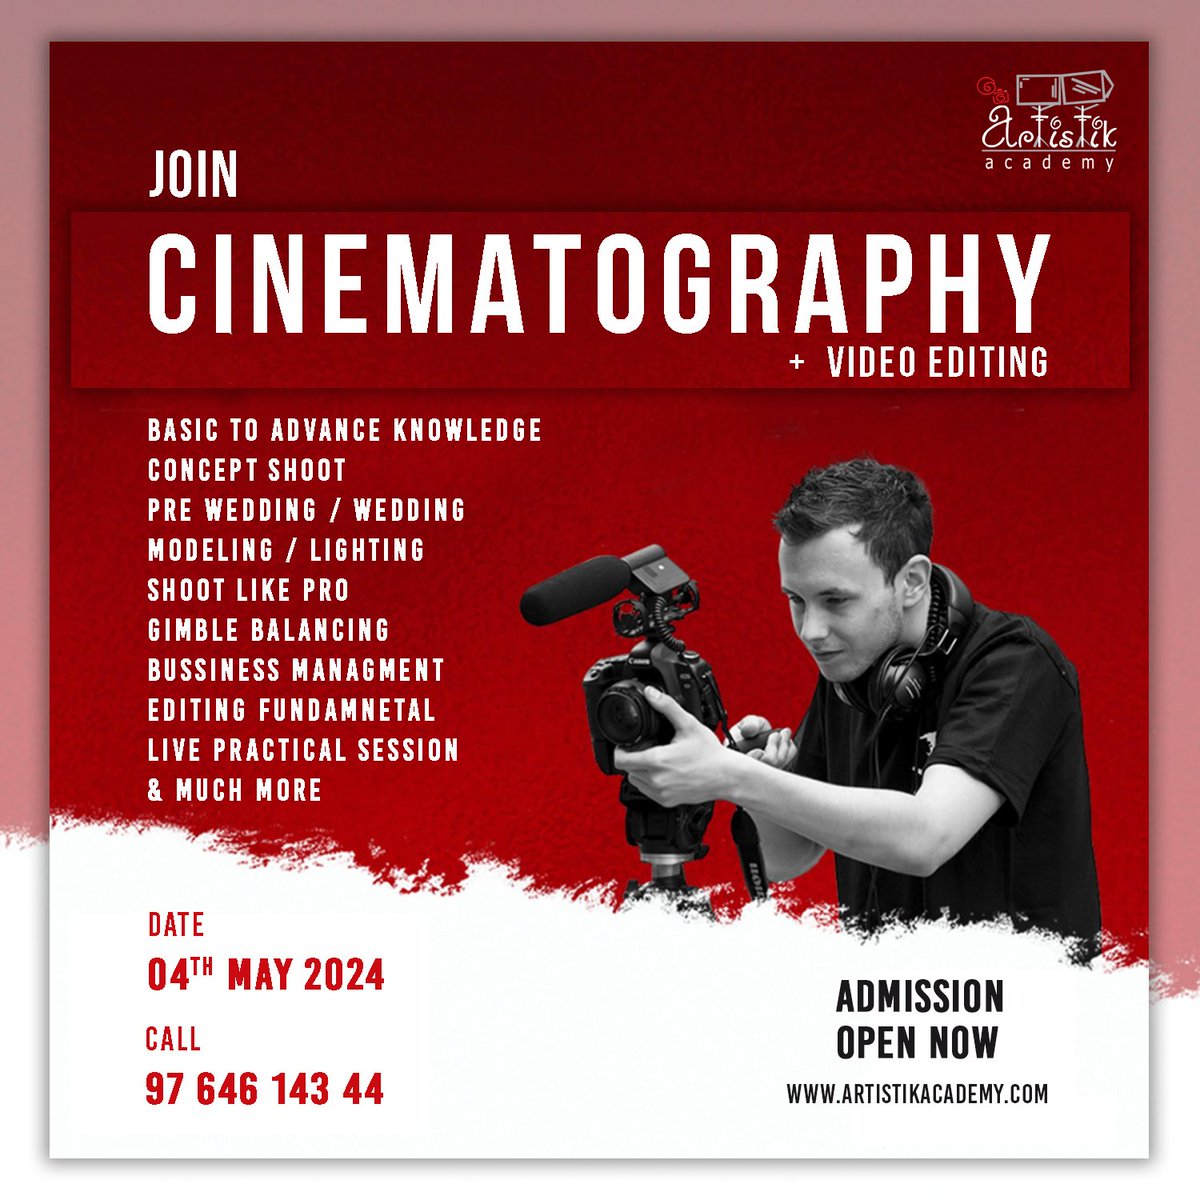 Artistik Academy
Explore the world of Cinematography + editing with us!
🎥 Unlock your creative potential and join our course today.
#cinematography #cinematic 
#VideoEditing #CreativeSkills #learncinematography #videography #editingskills  #artistikkt #artistikacademynashik